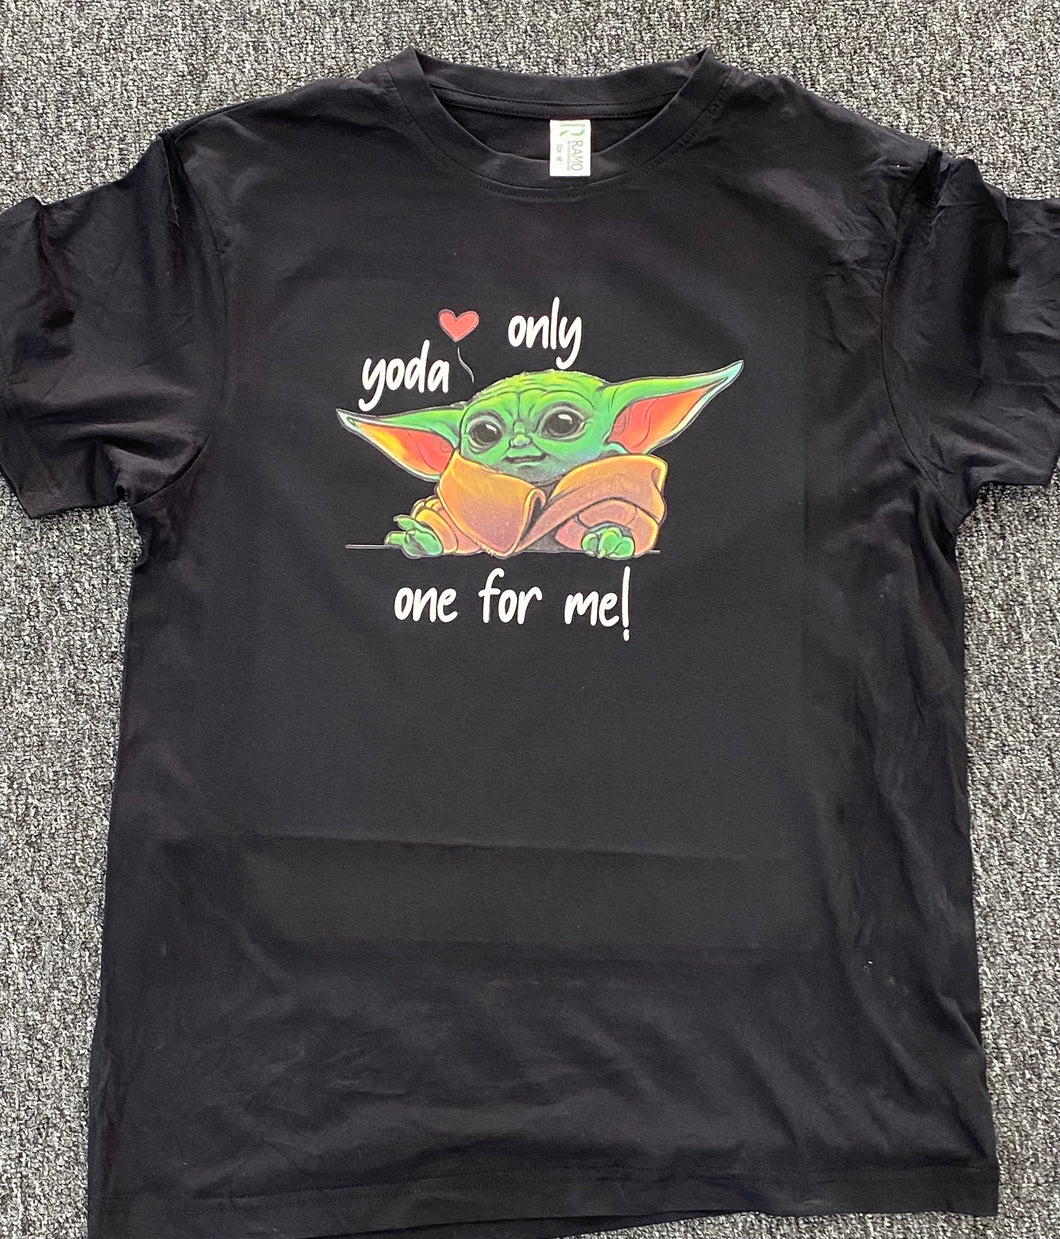 Yoda only one for me  t-shirt